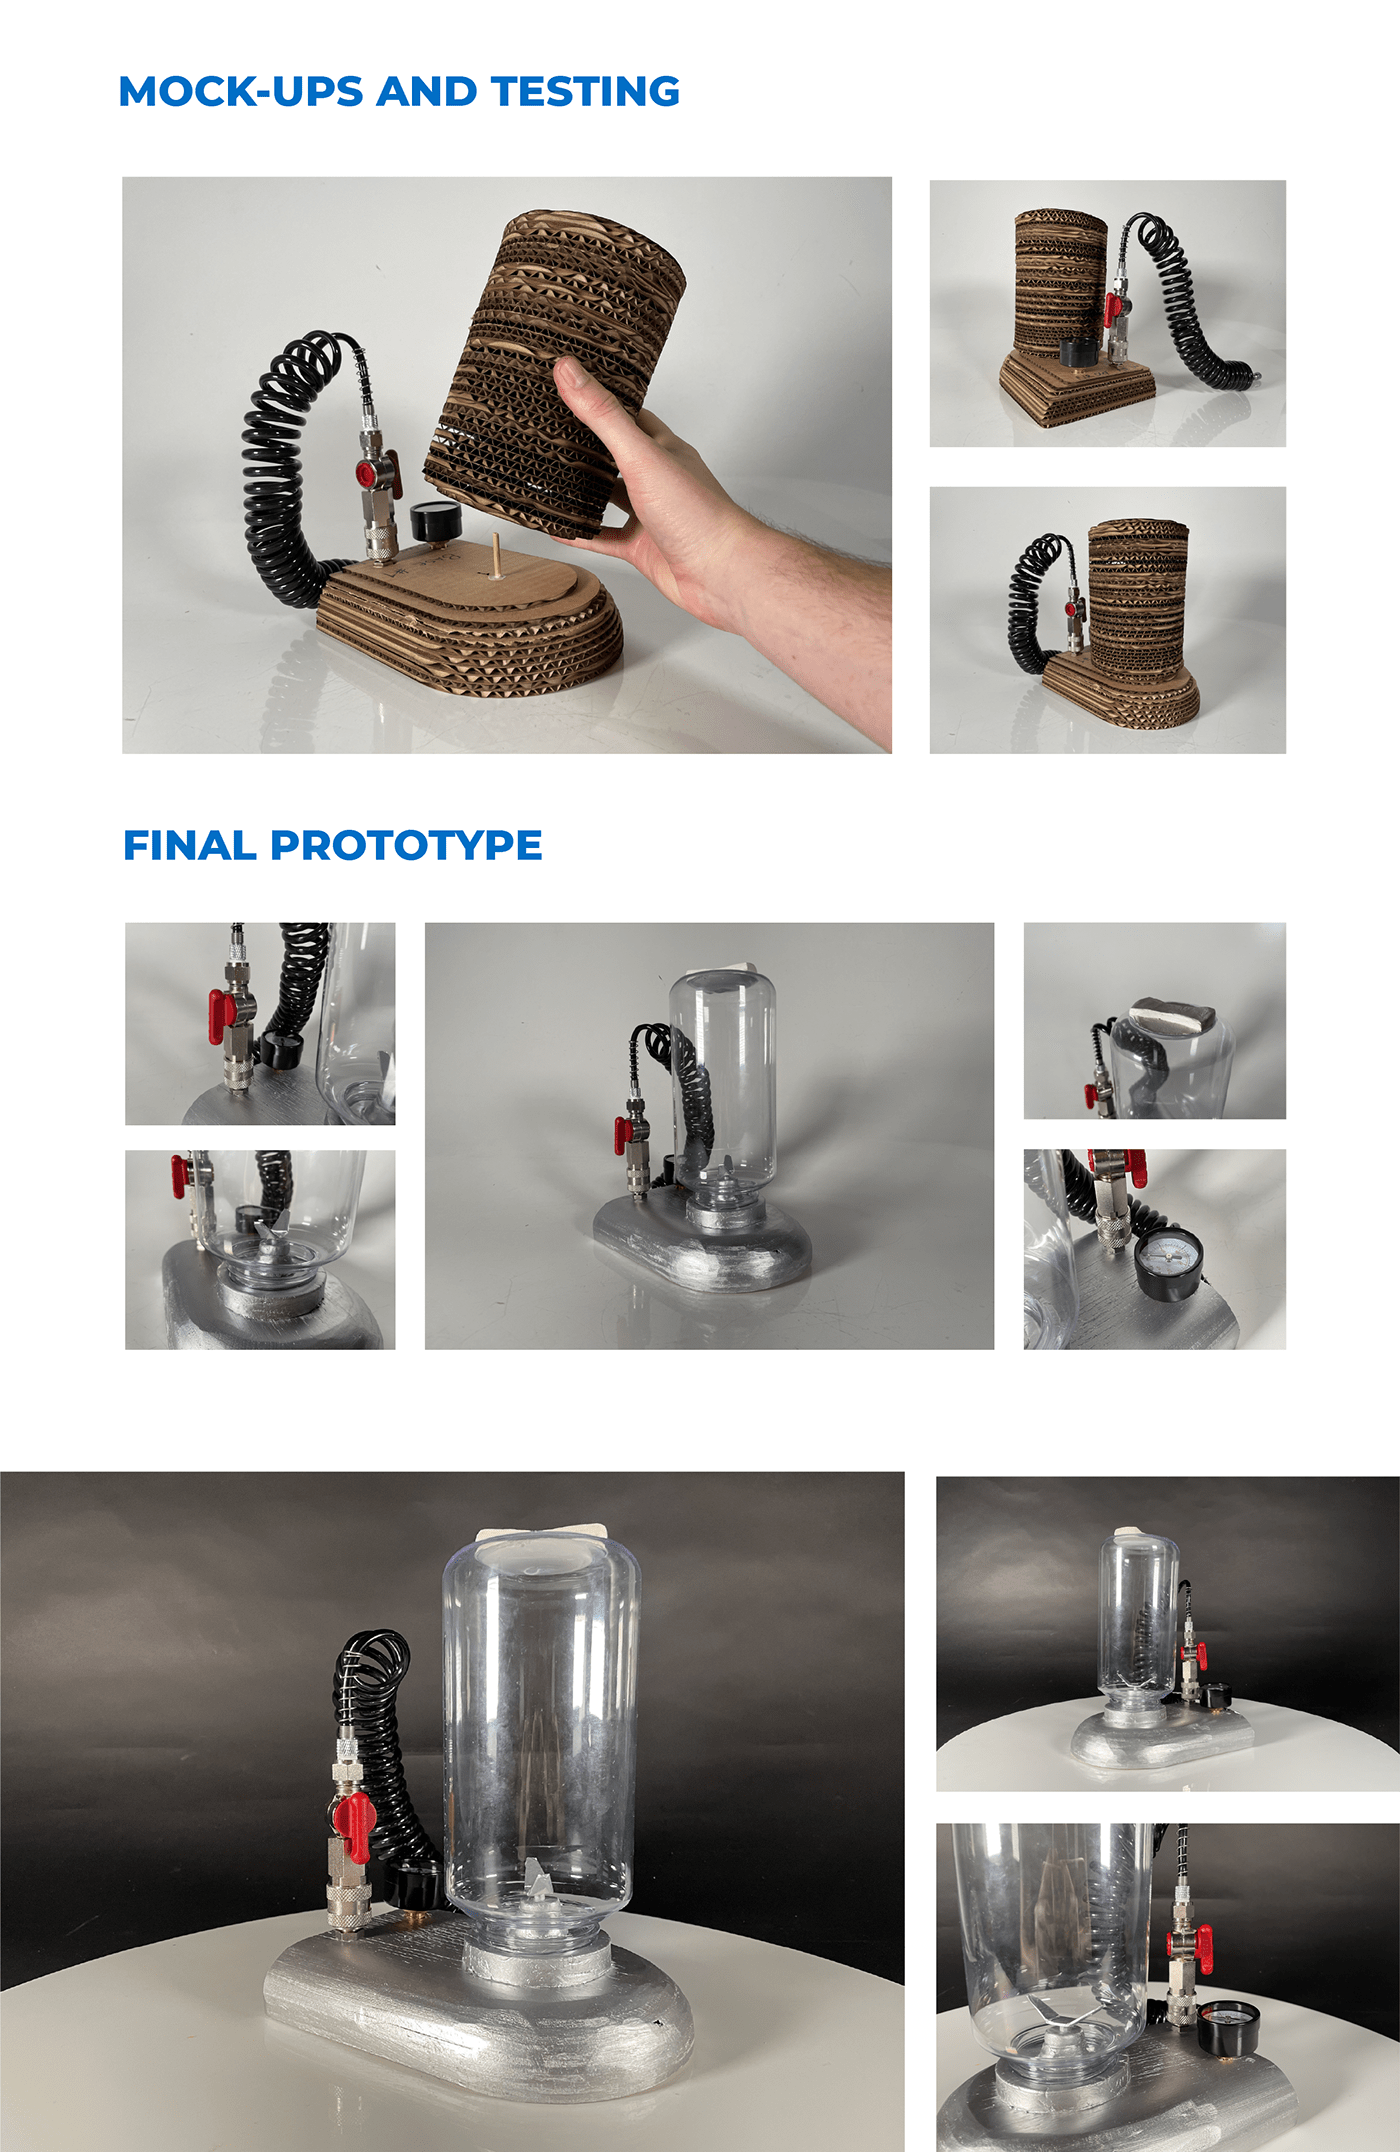 Aircraft concept design exams FinalExamProject industrial kitchendesign product tools